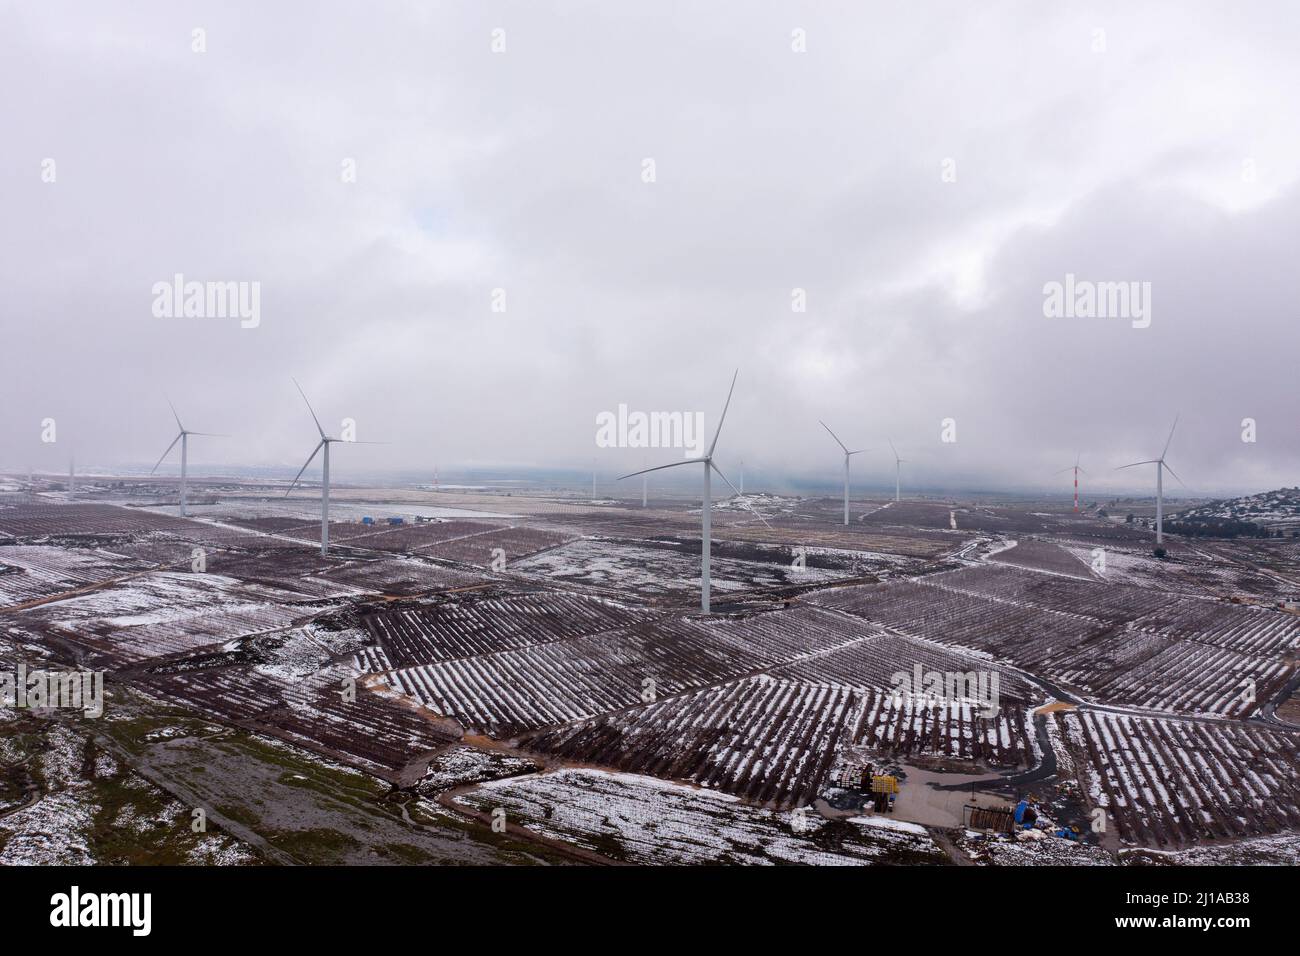 Wind turbine in a snowy landscape with early winter morning mist. Stock Photo